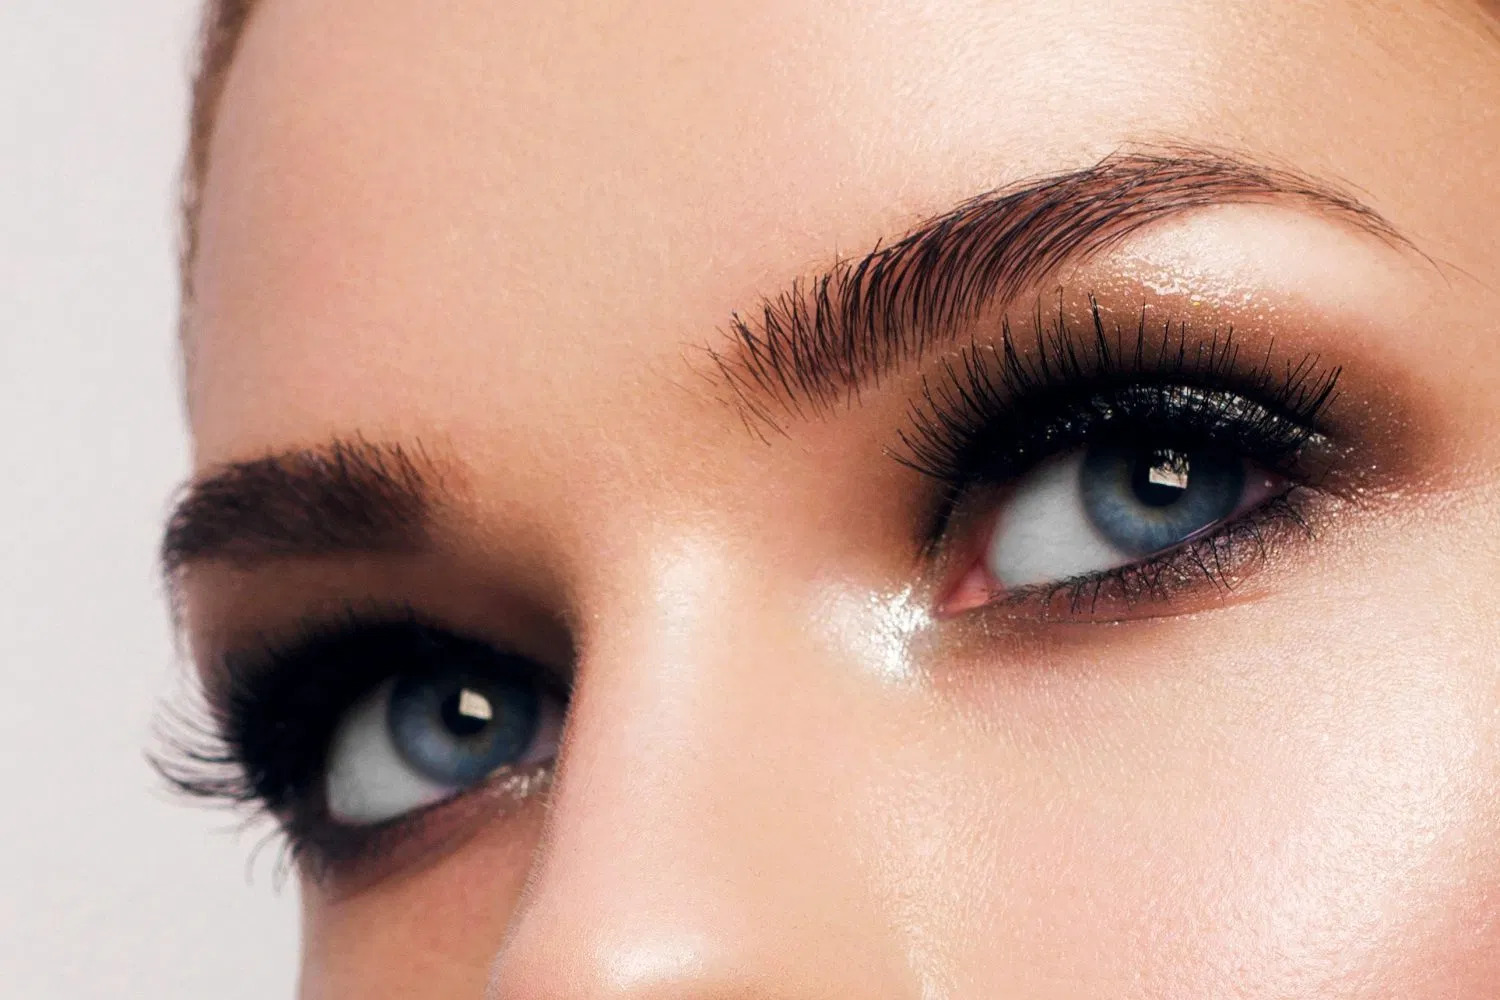 The most necessary tools and accessories for an eyebrow artist